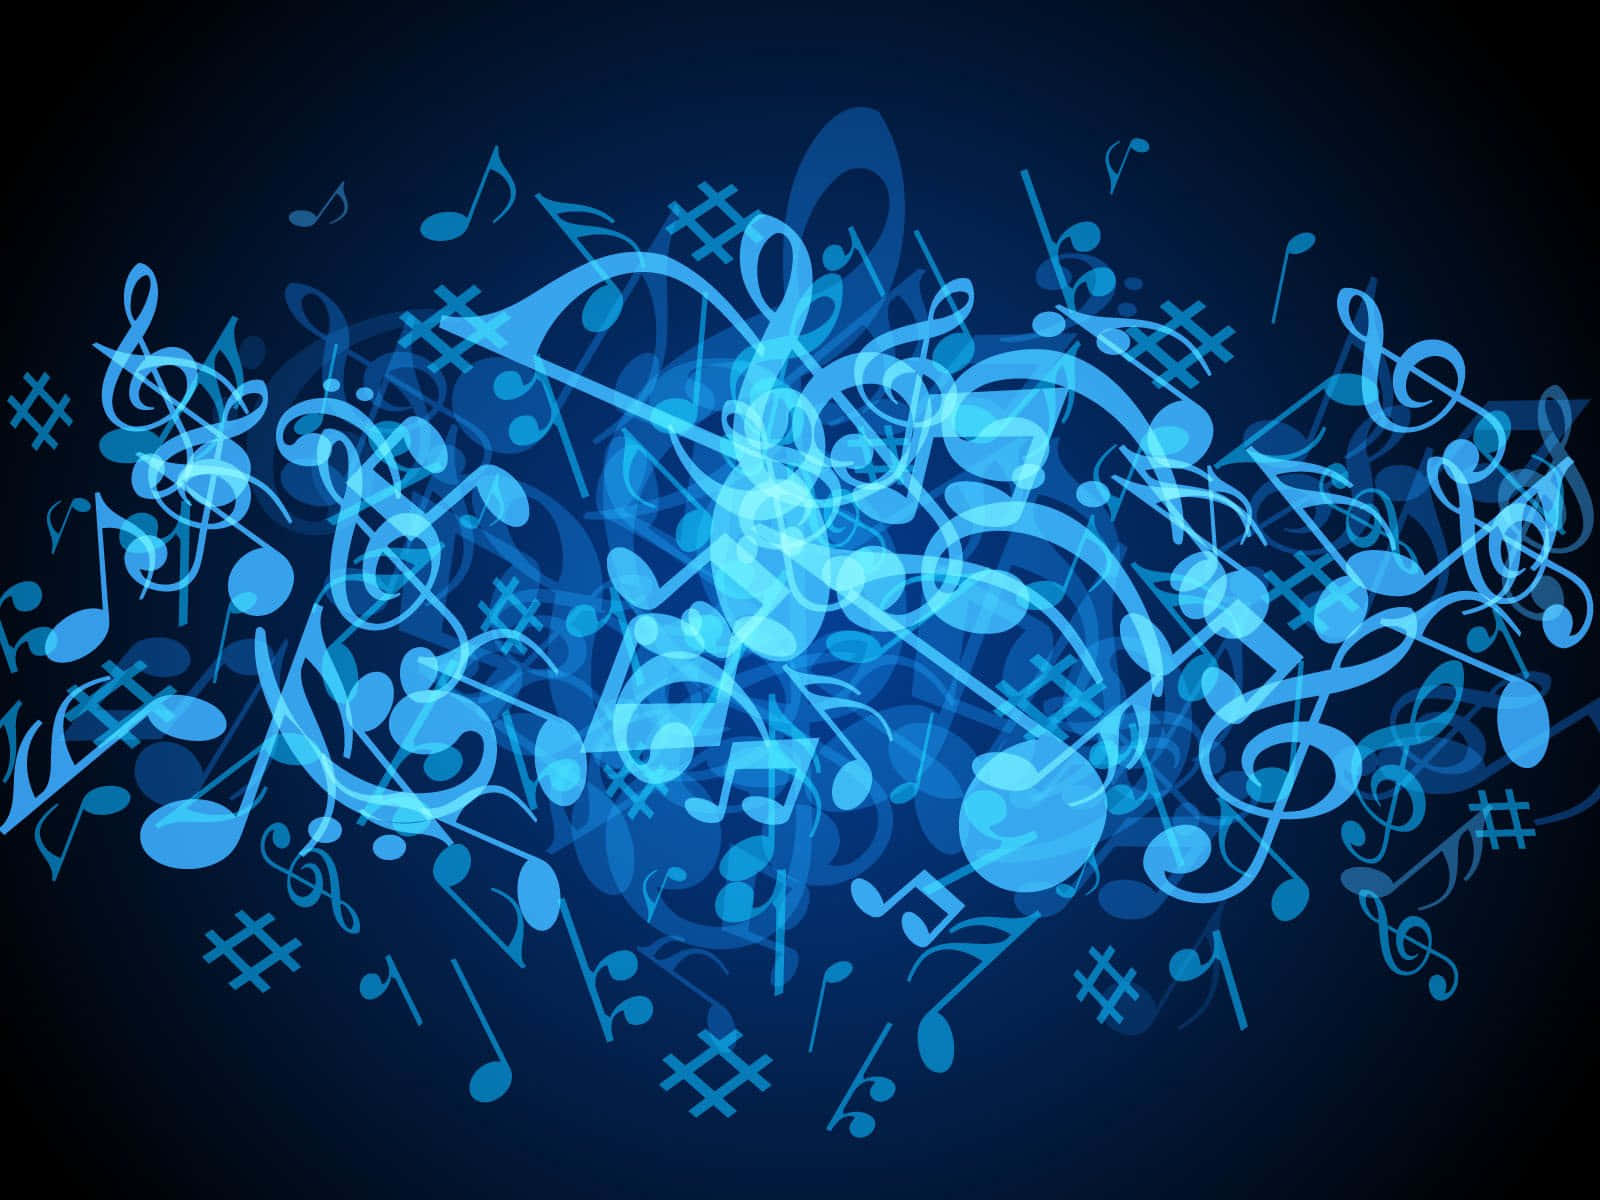 Captivating Melody: Abstract Musical Expression